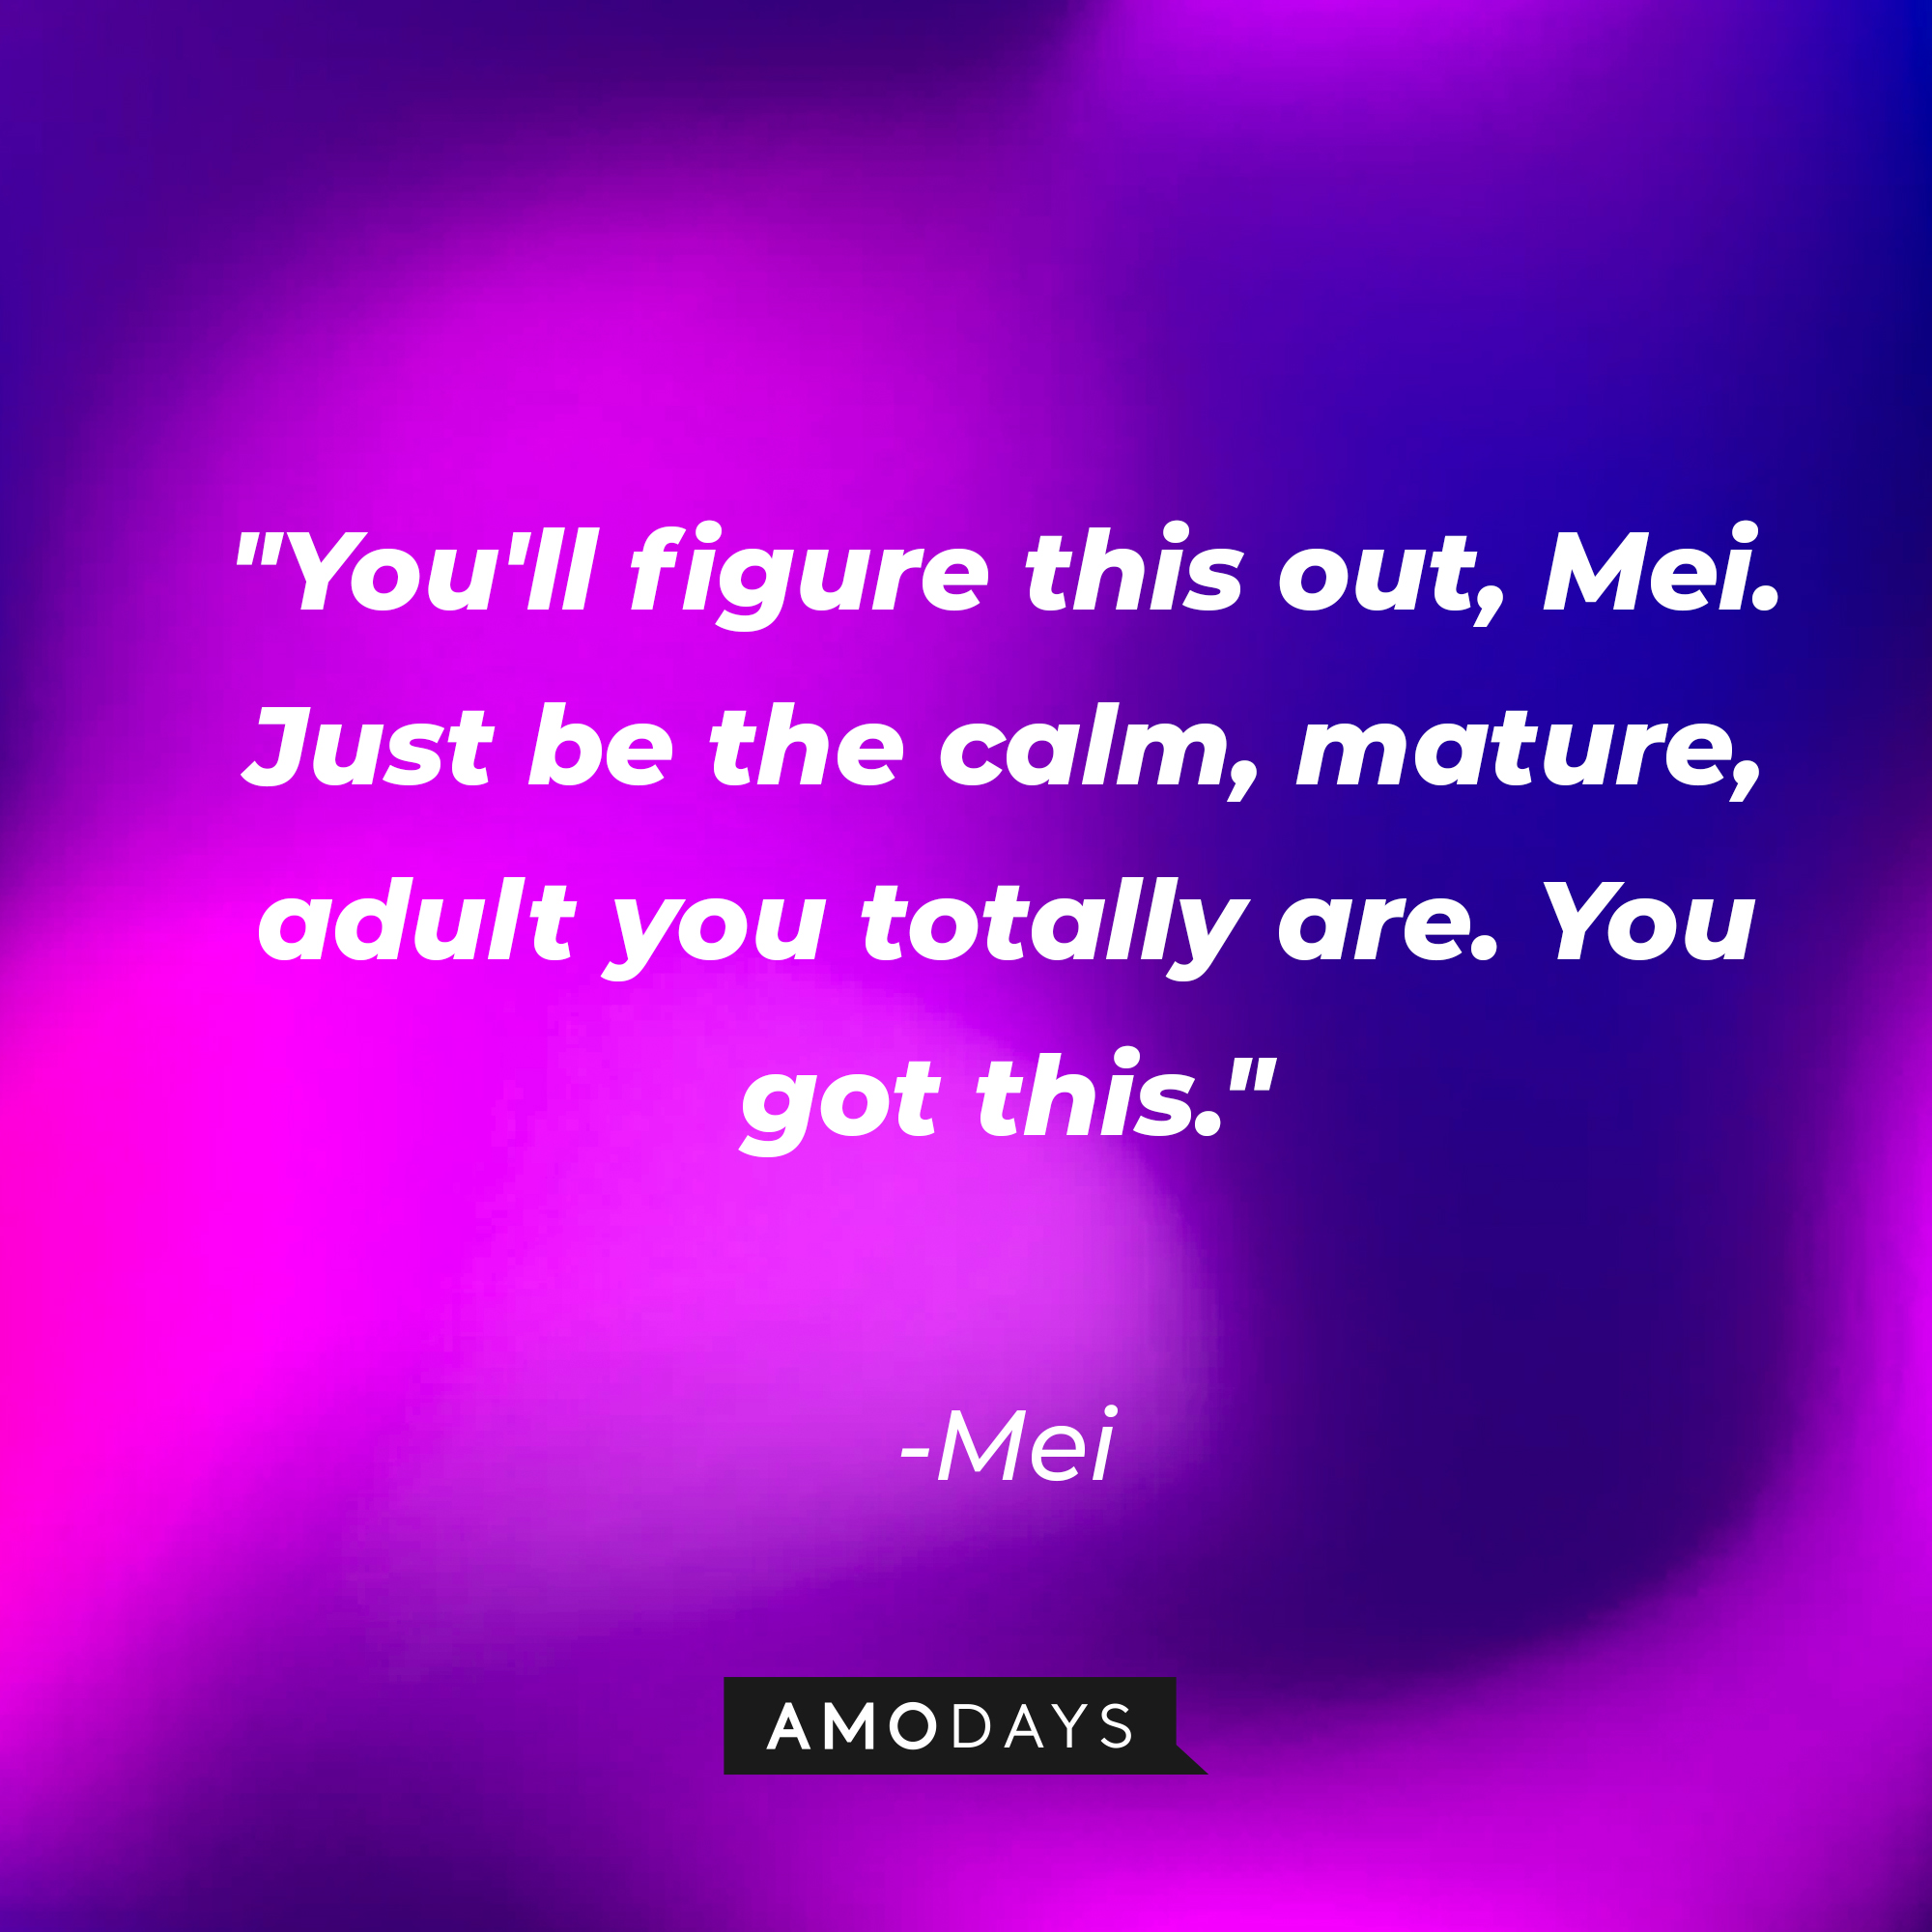 Mei's quote: "You'll figure this out, Mei. Just be the calm, mature, adult you totally are. You got this." | Source: AmoDays